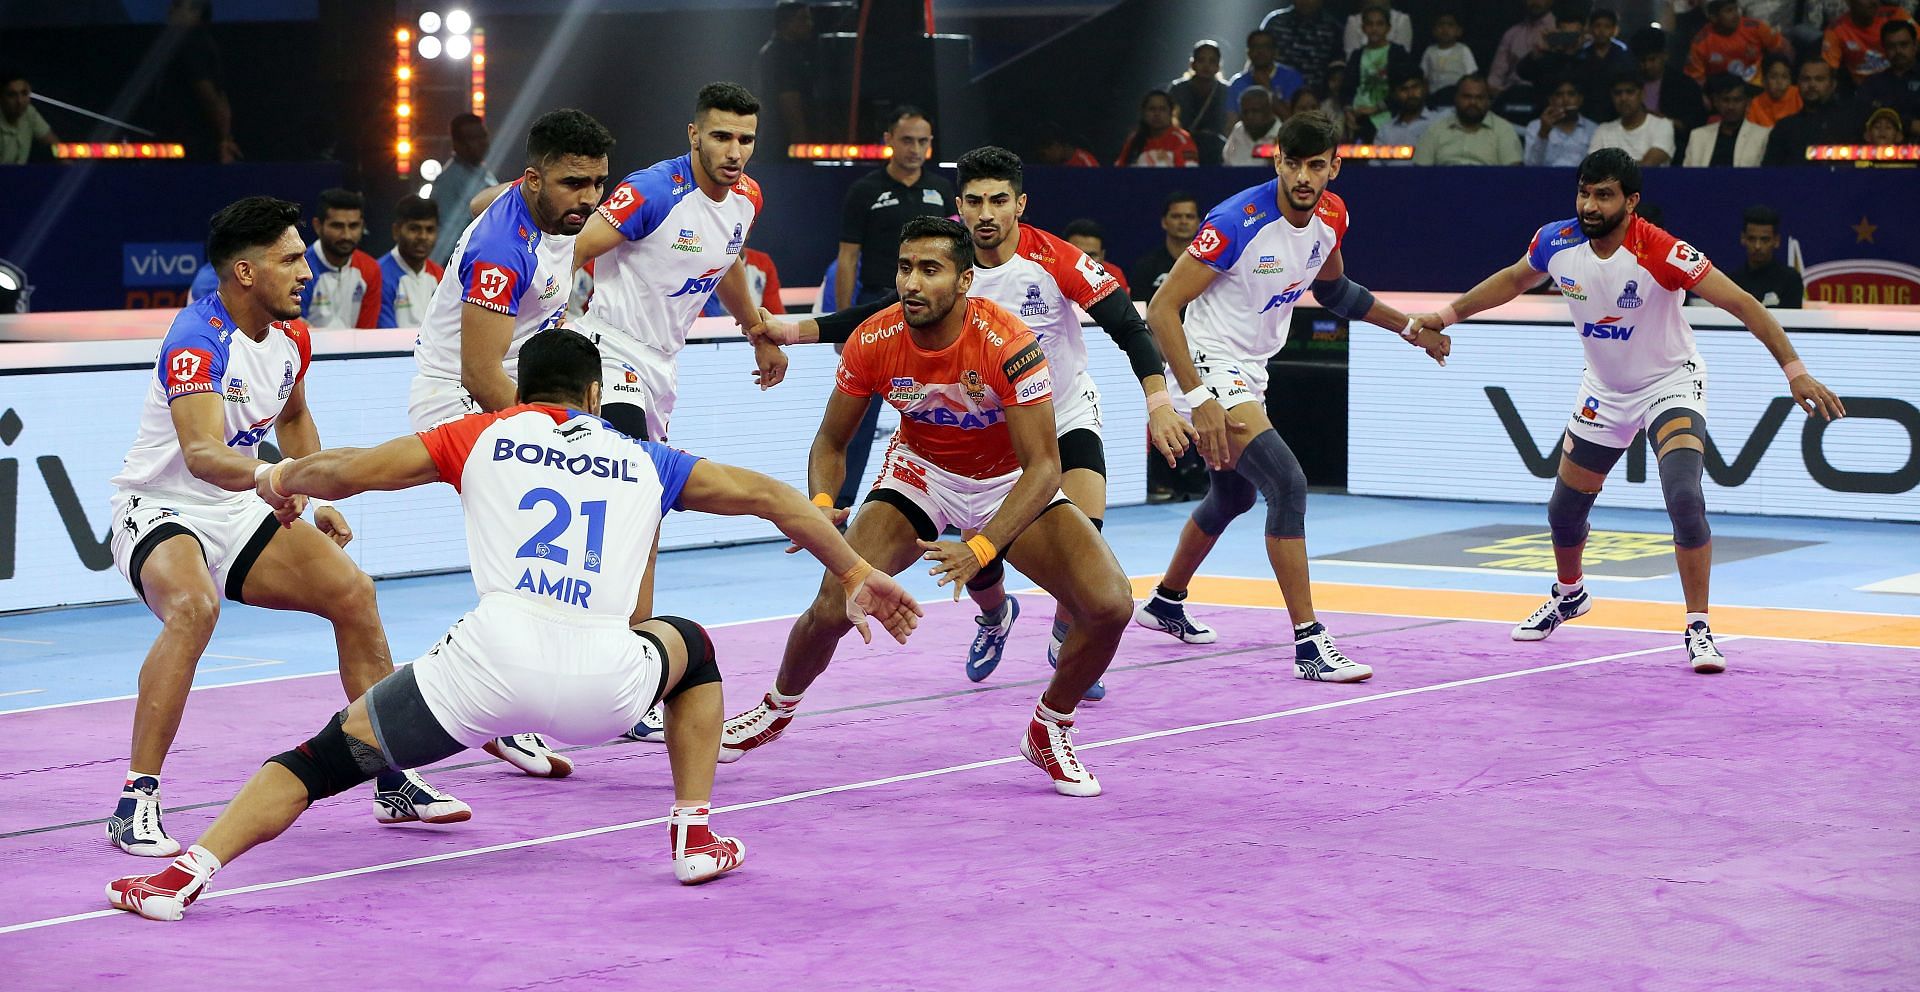 Gujarat Giants are 11th in the Pro Kabaddi 2022 points table (Image: Pro Kabaddi League)